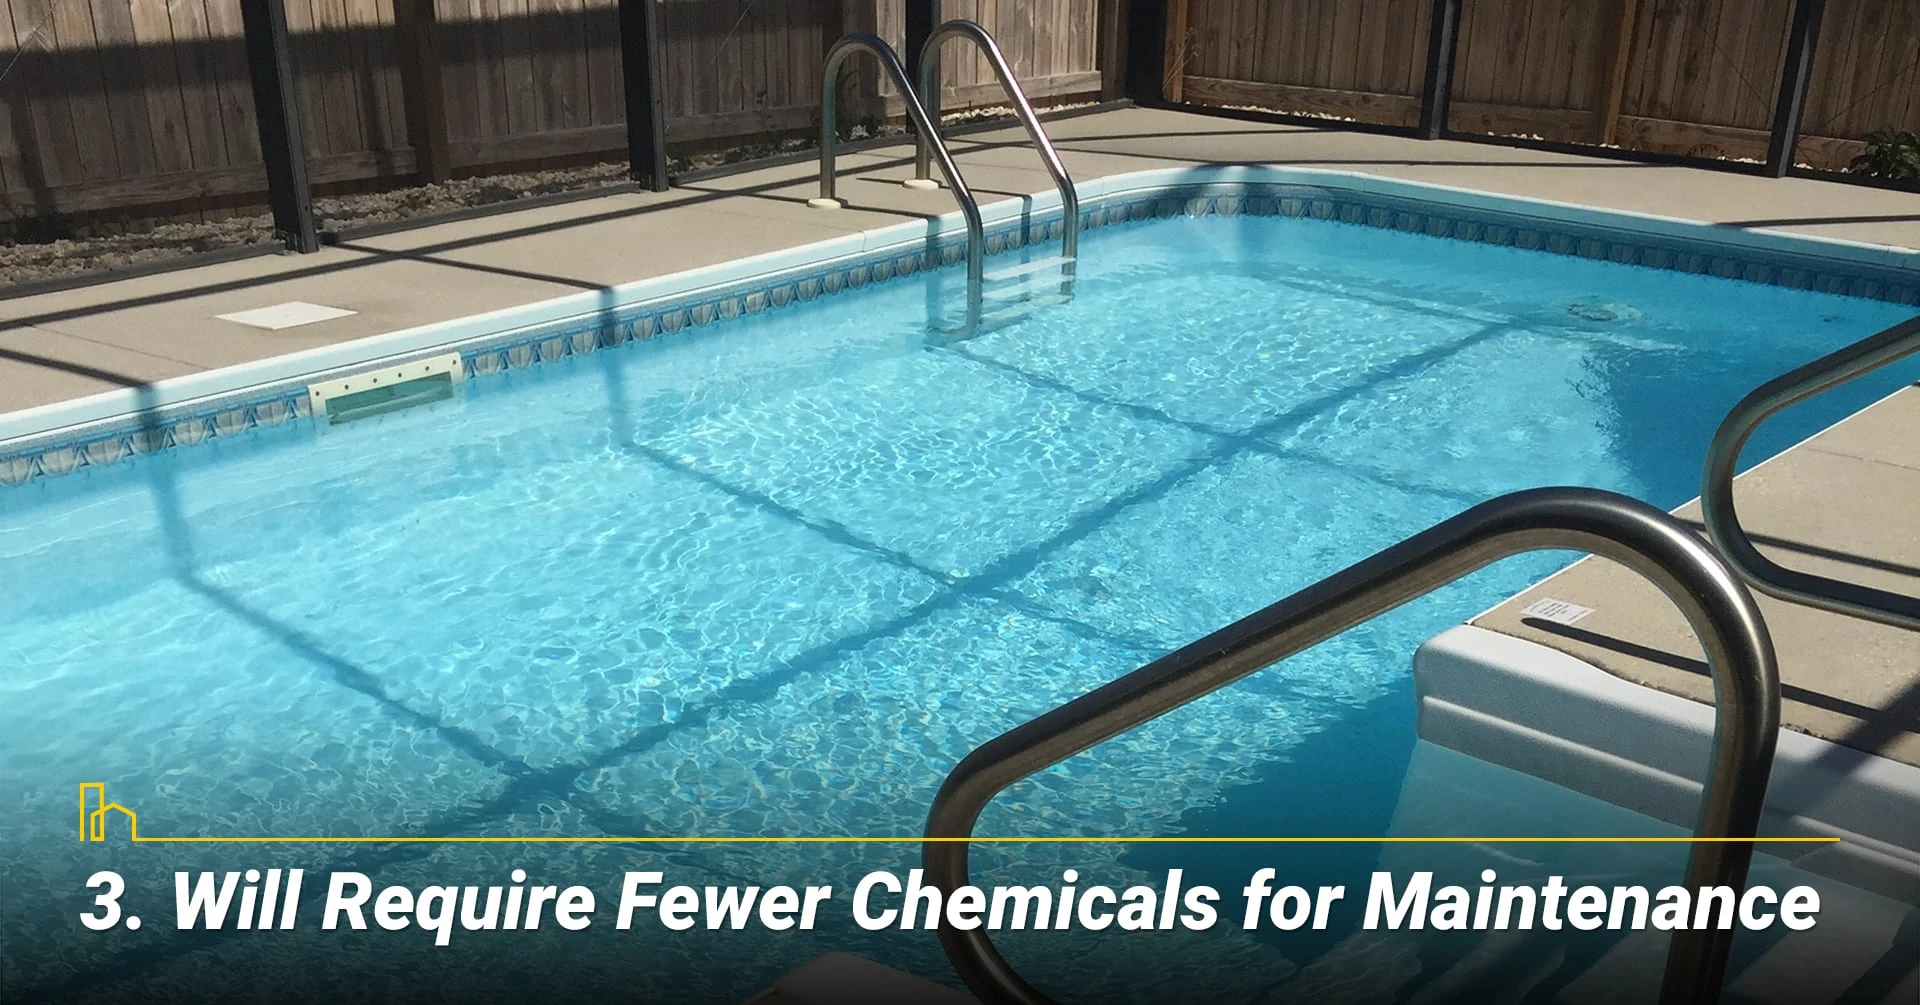 Fewer Chemicals for Maintenance, use less chemical to keep it clean